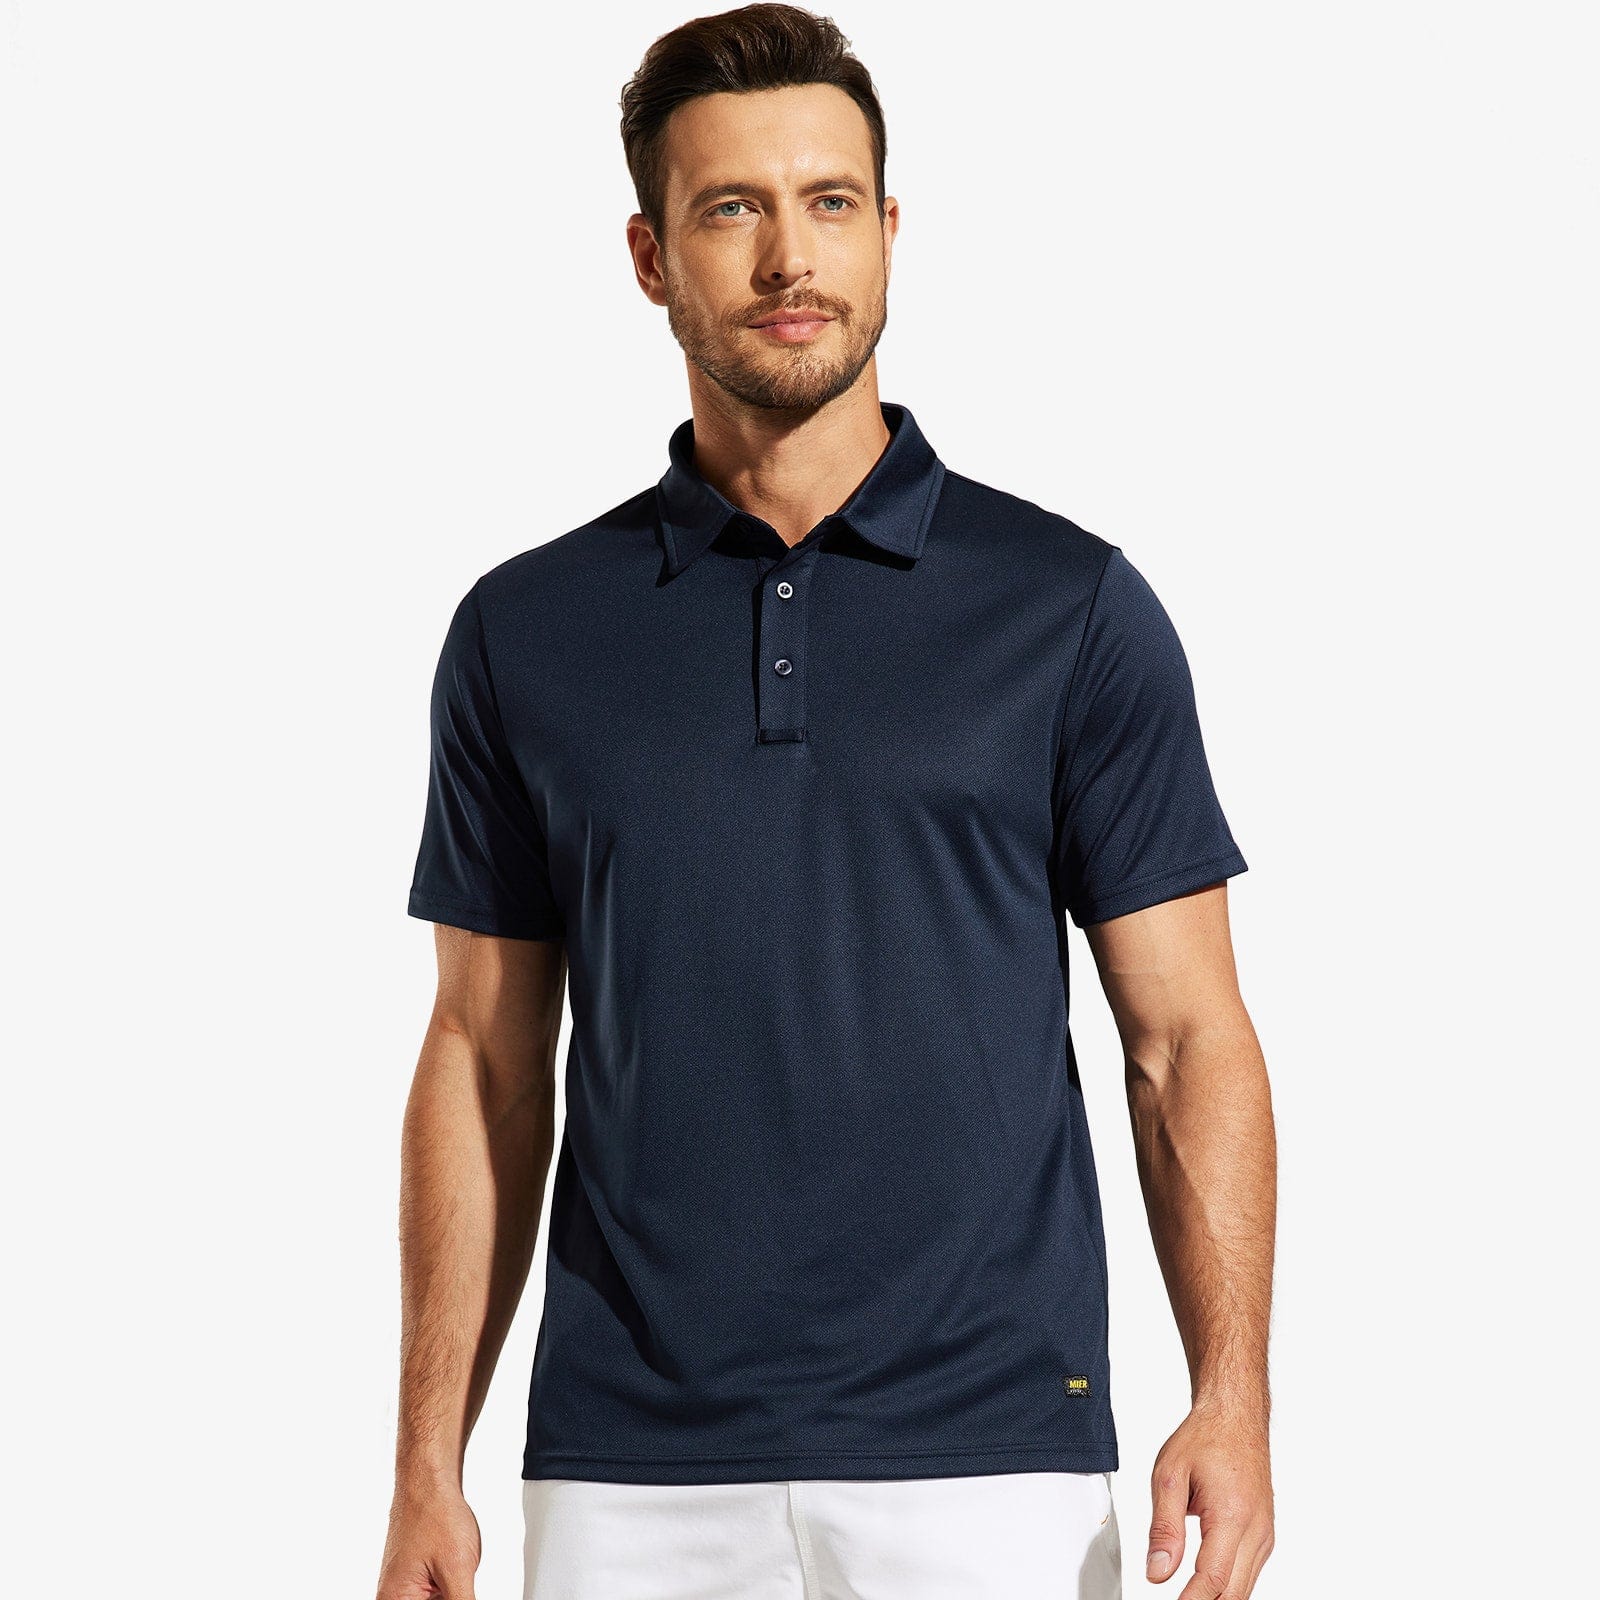 Men's Quick Dry Polo Shirt Collared Golf Casual Shirts, Navy / S